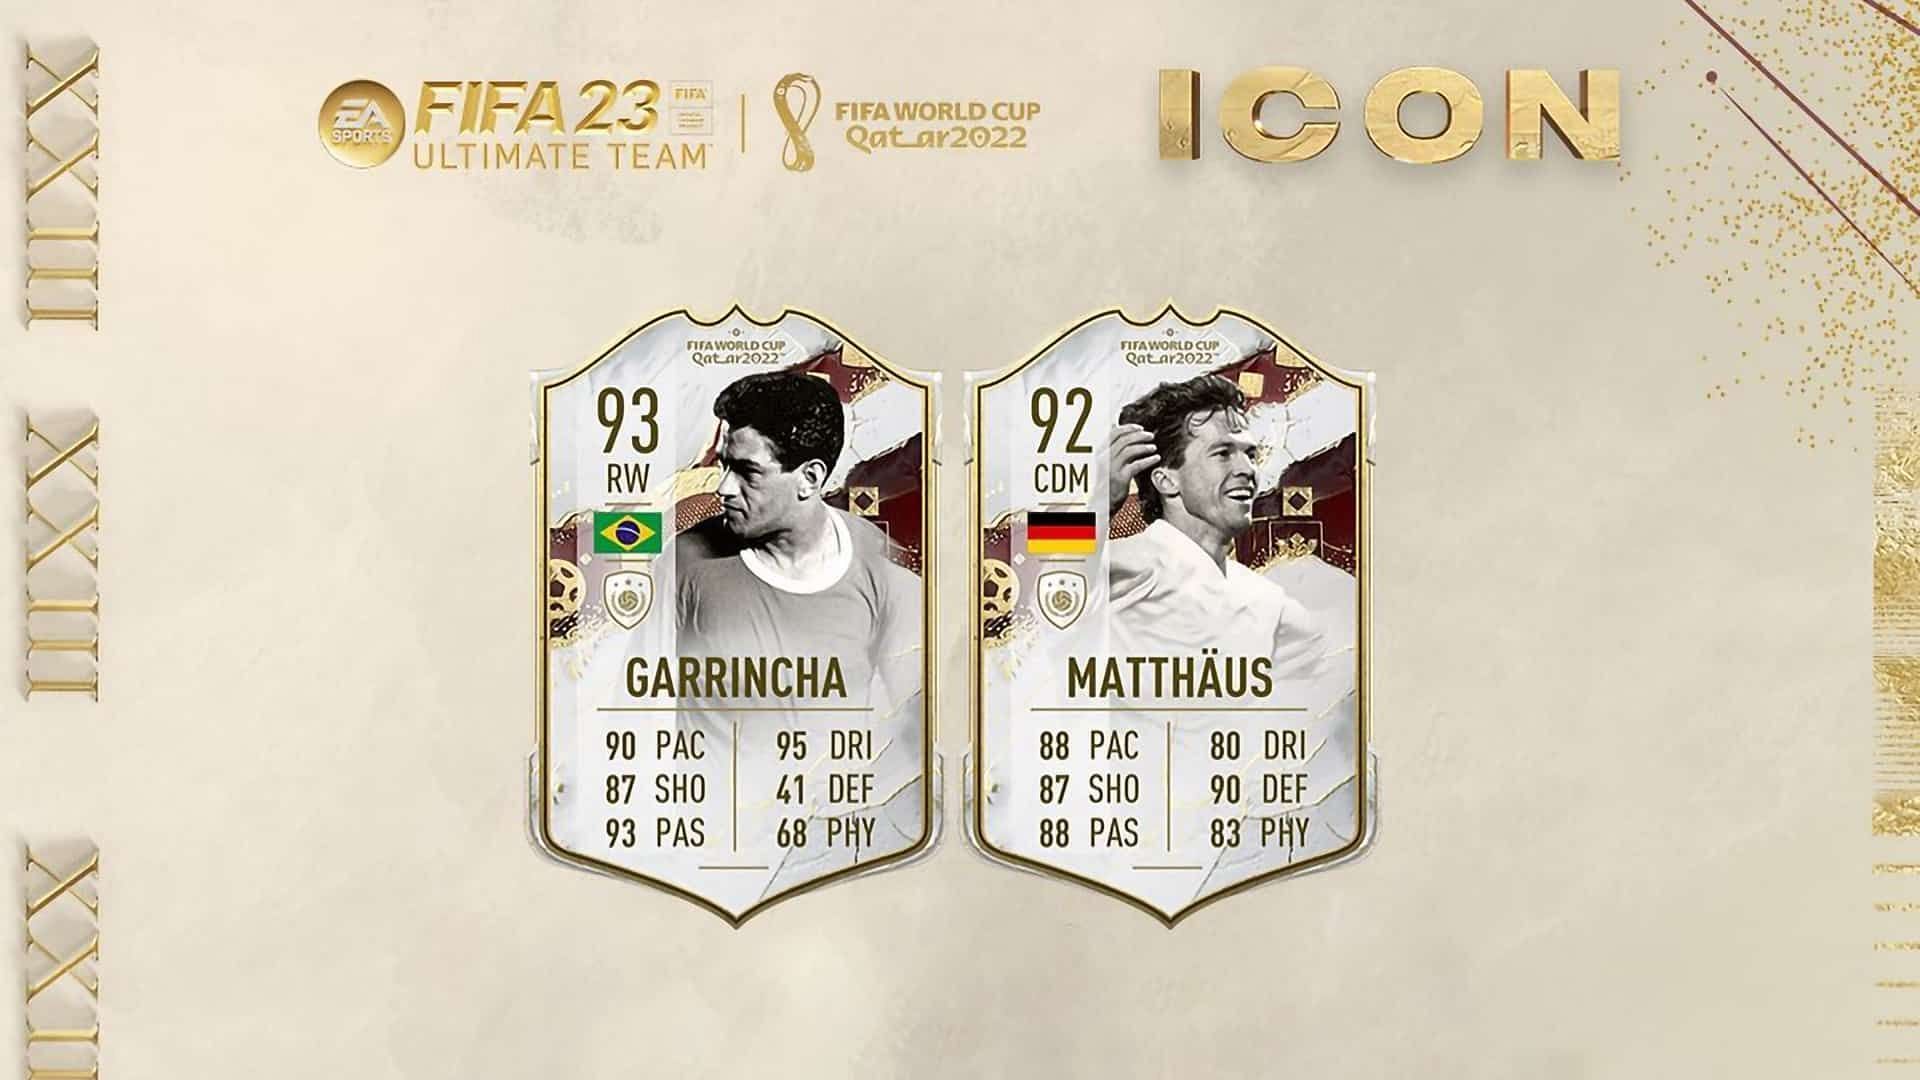 This is another great opportunity for players to get some special icons for their squads (Image via EA Sports)